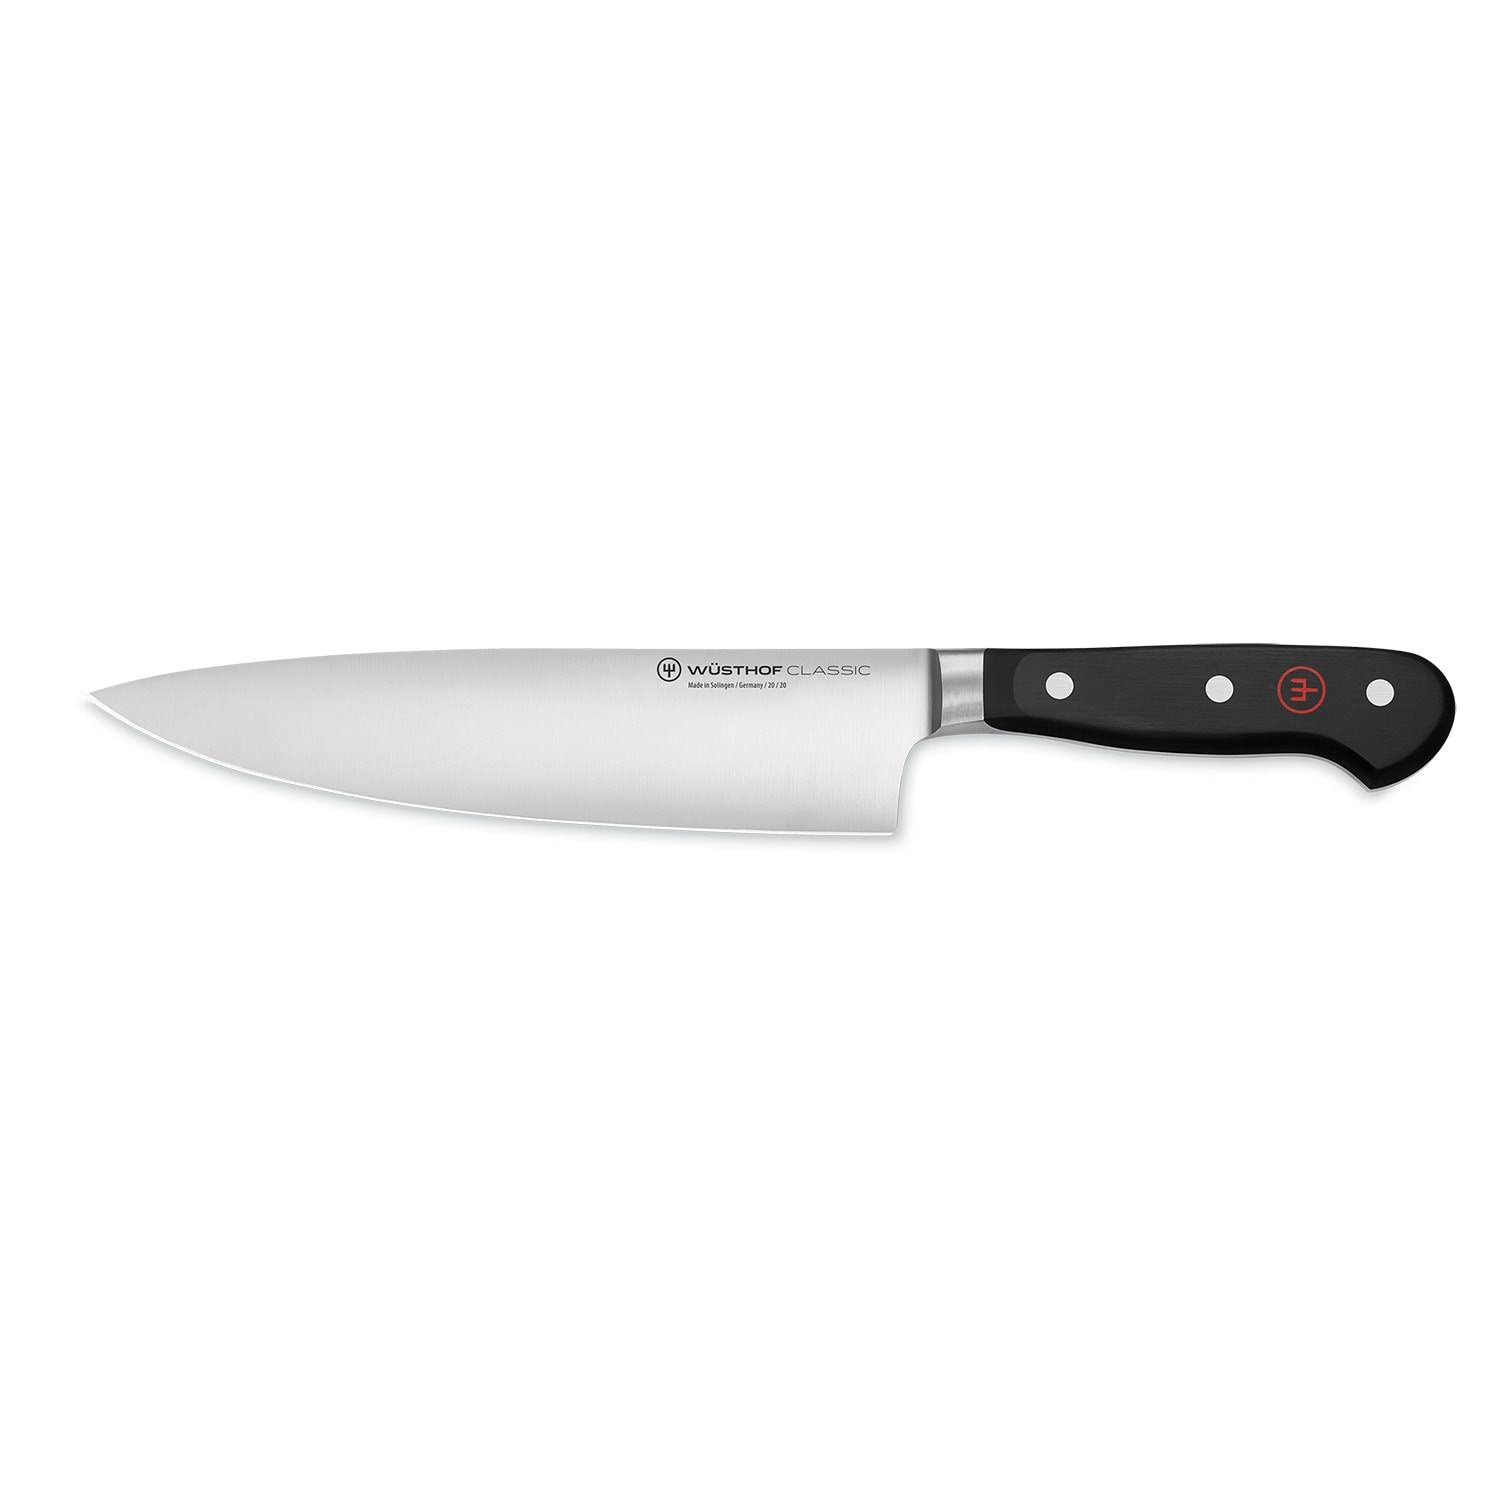 Wüsthof Classic Chef Knife 20 cm - Chef Knives Stainless Steel - 1040130120